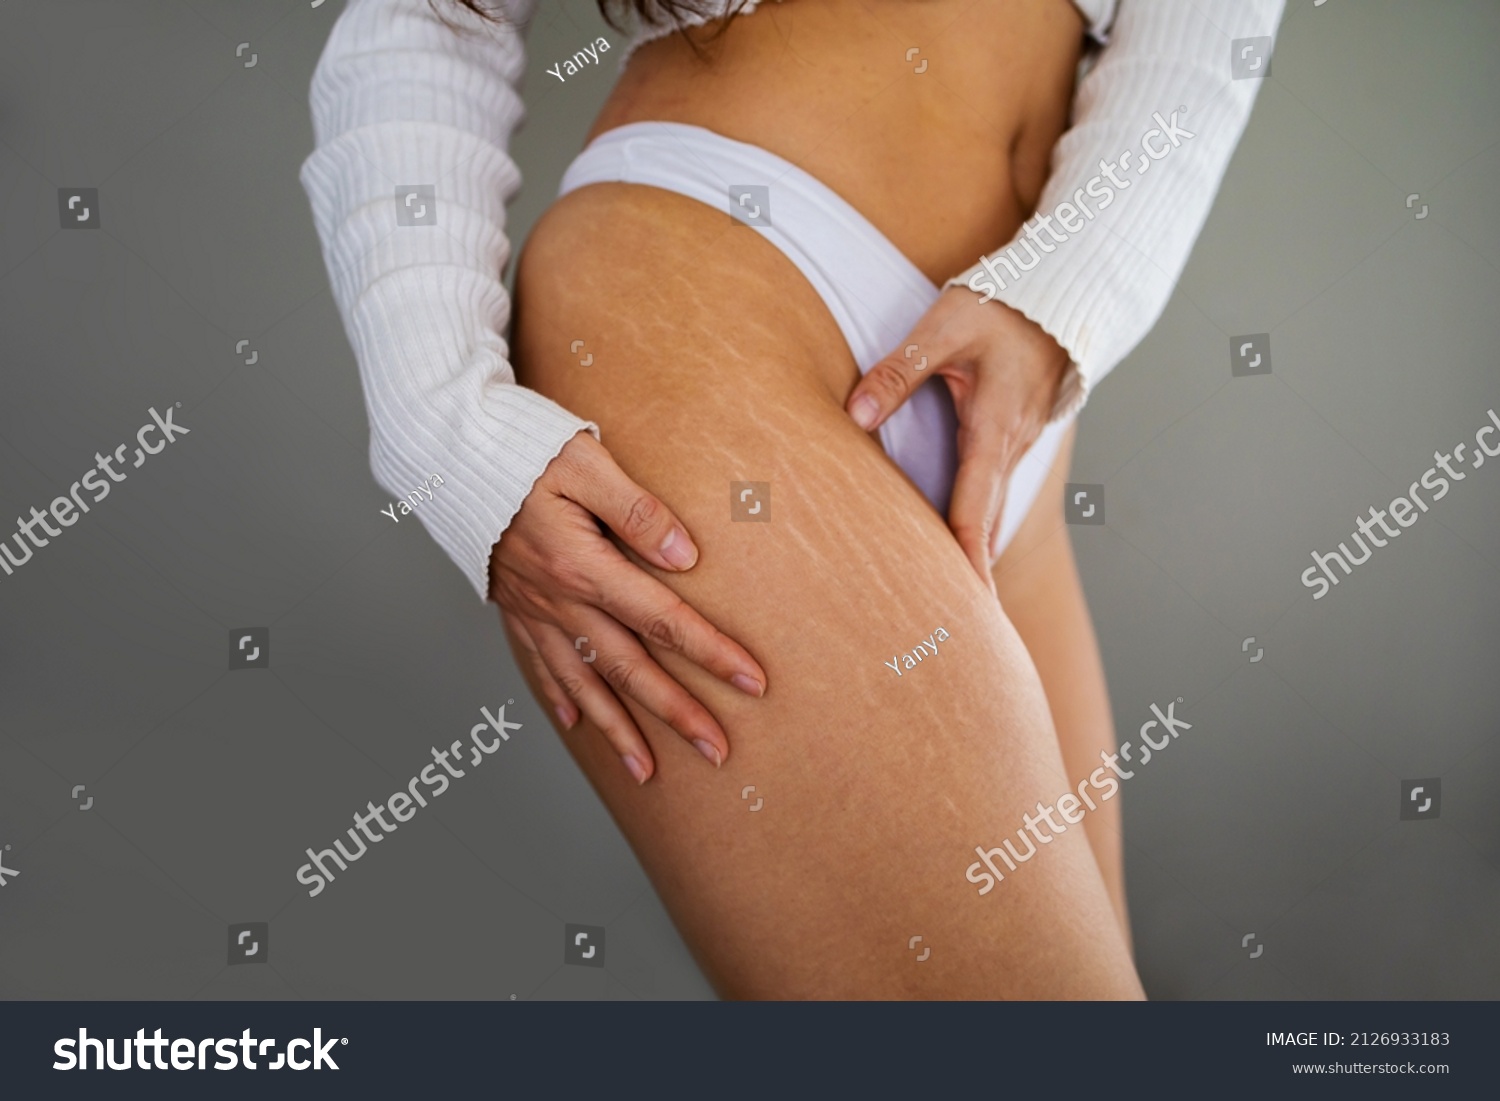 Stretch marks on female legs. A woman's hand holds a fat cellulite and a stretch mark on her leg. Cellulite. #2126933183